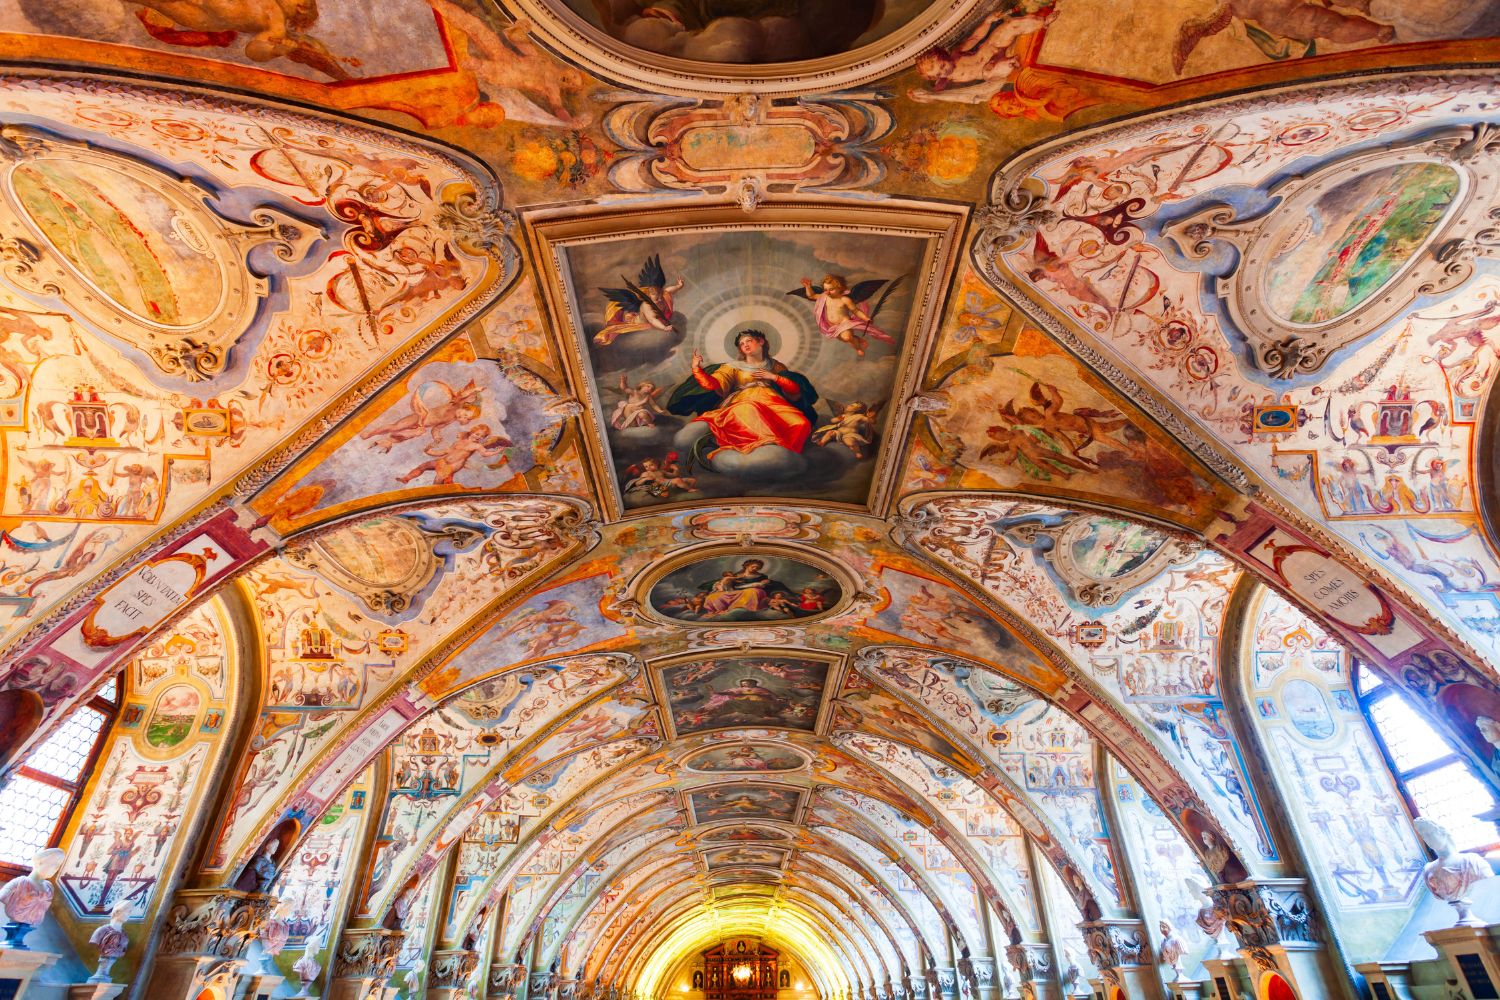 Residenz museum palace in Munich the most beautiful place to visit in Munchen